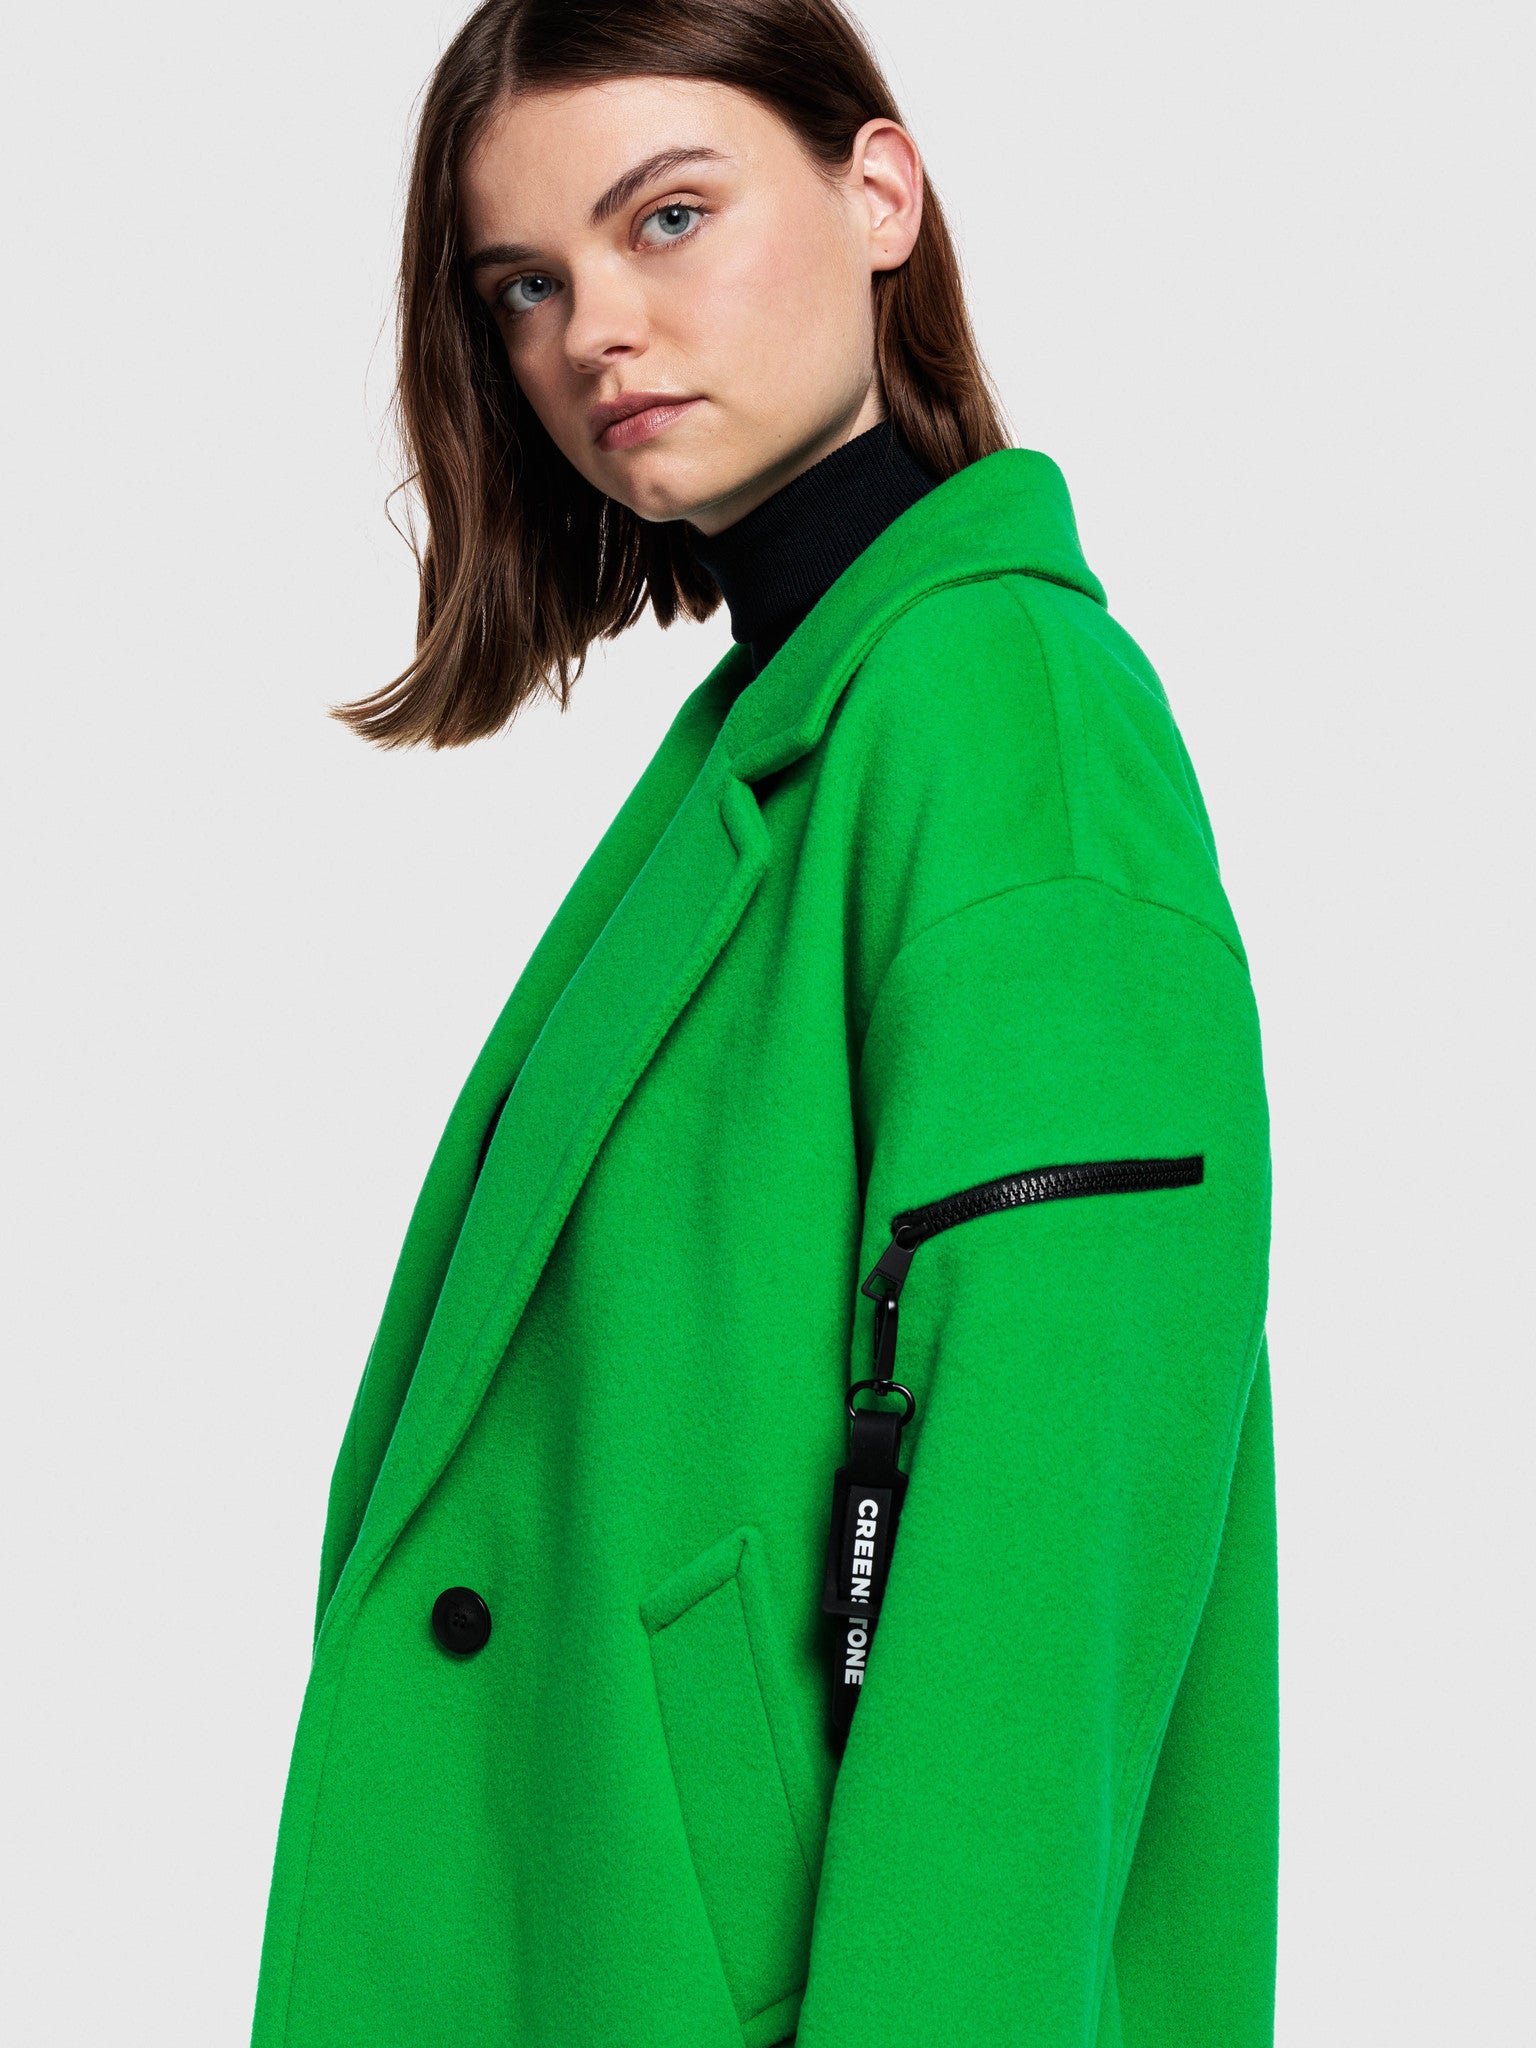 CREENSTONE WOOL CASHMERE COCOON JACKET - BRIGHT GREEN